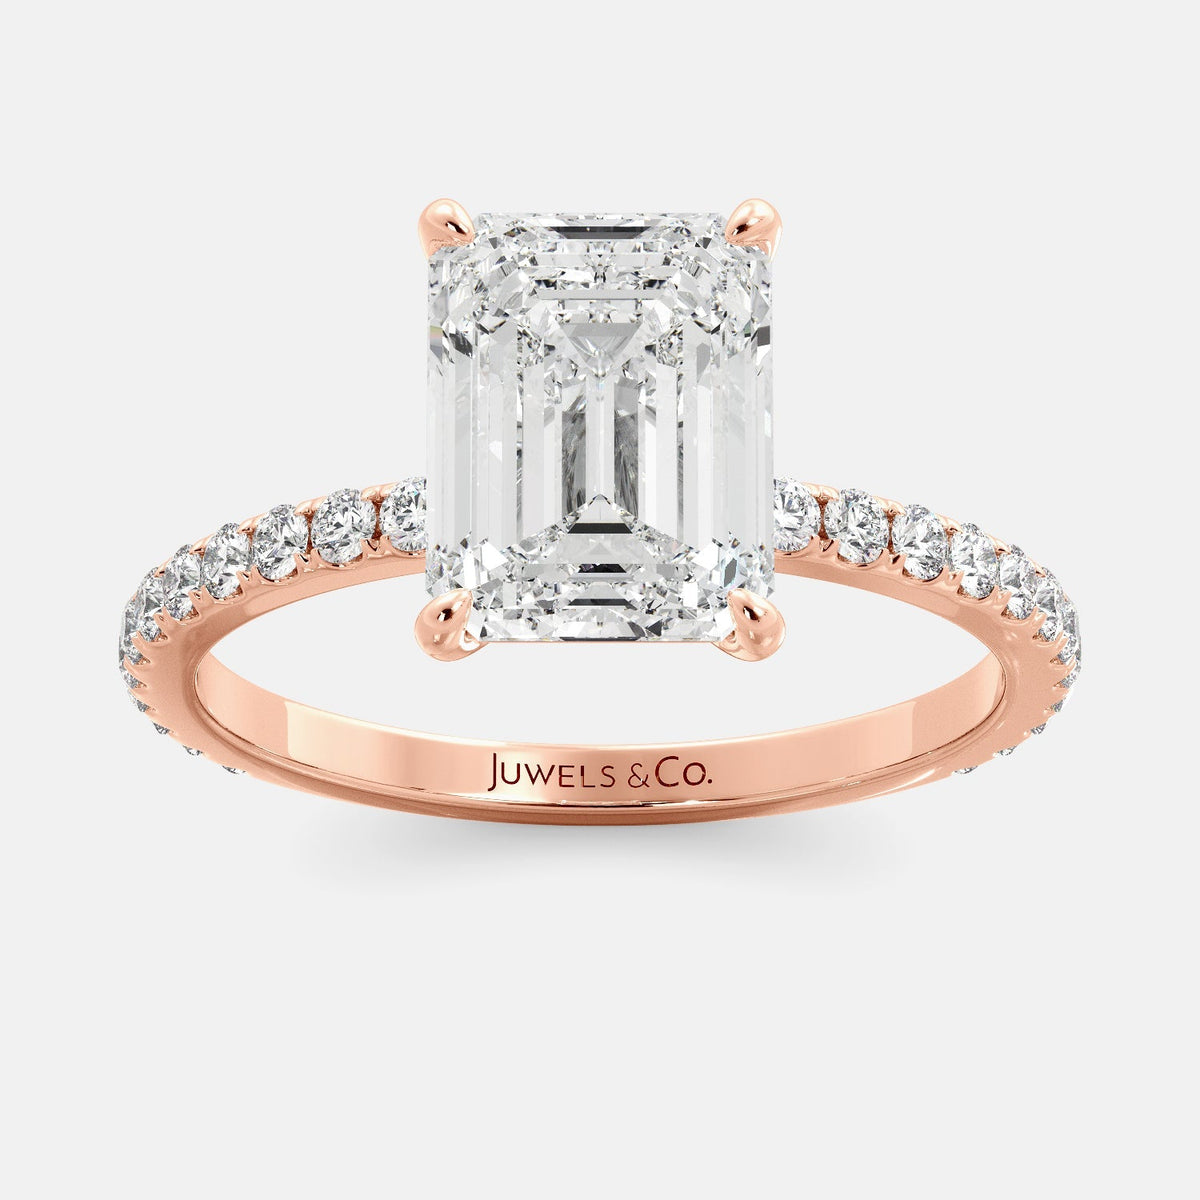 A close-up of an emerald solitaire lab-diamond ring with pave in rose gold. The ring is set with an emerald-cut lab diamond in the center, surrounded by a row of smaller diamonds on the band. The diamond is climate-positive as it used carbon from the atmosphere to produce. The ring is available in a variety of sizes and starts at \\$6,350.00.